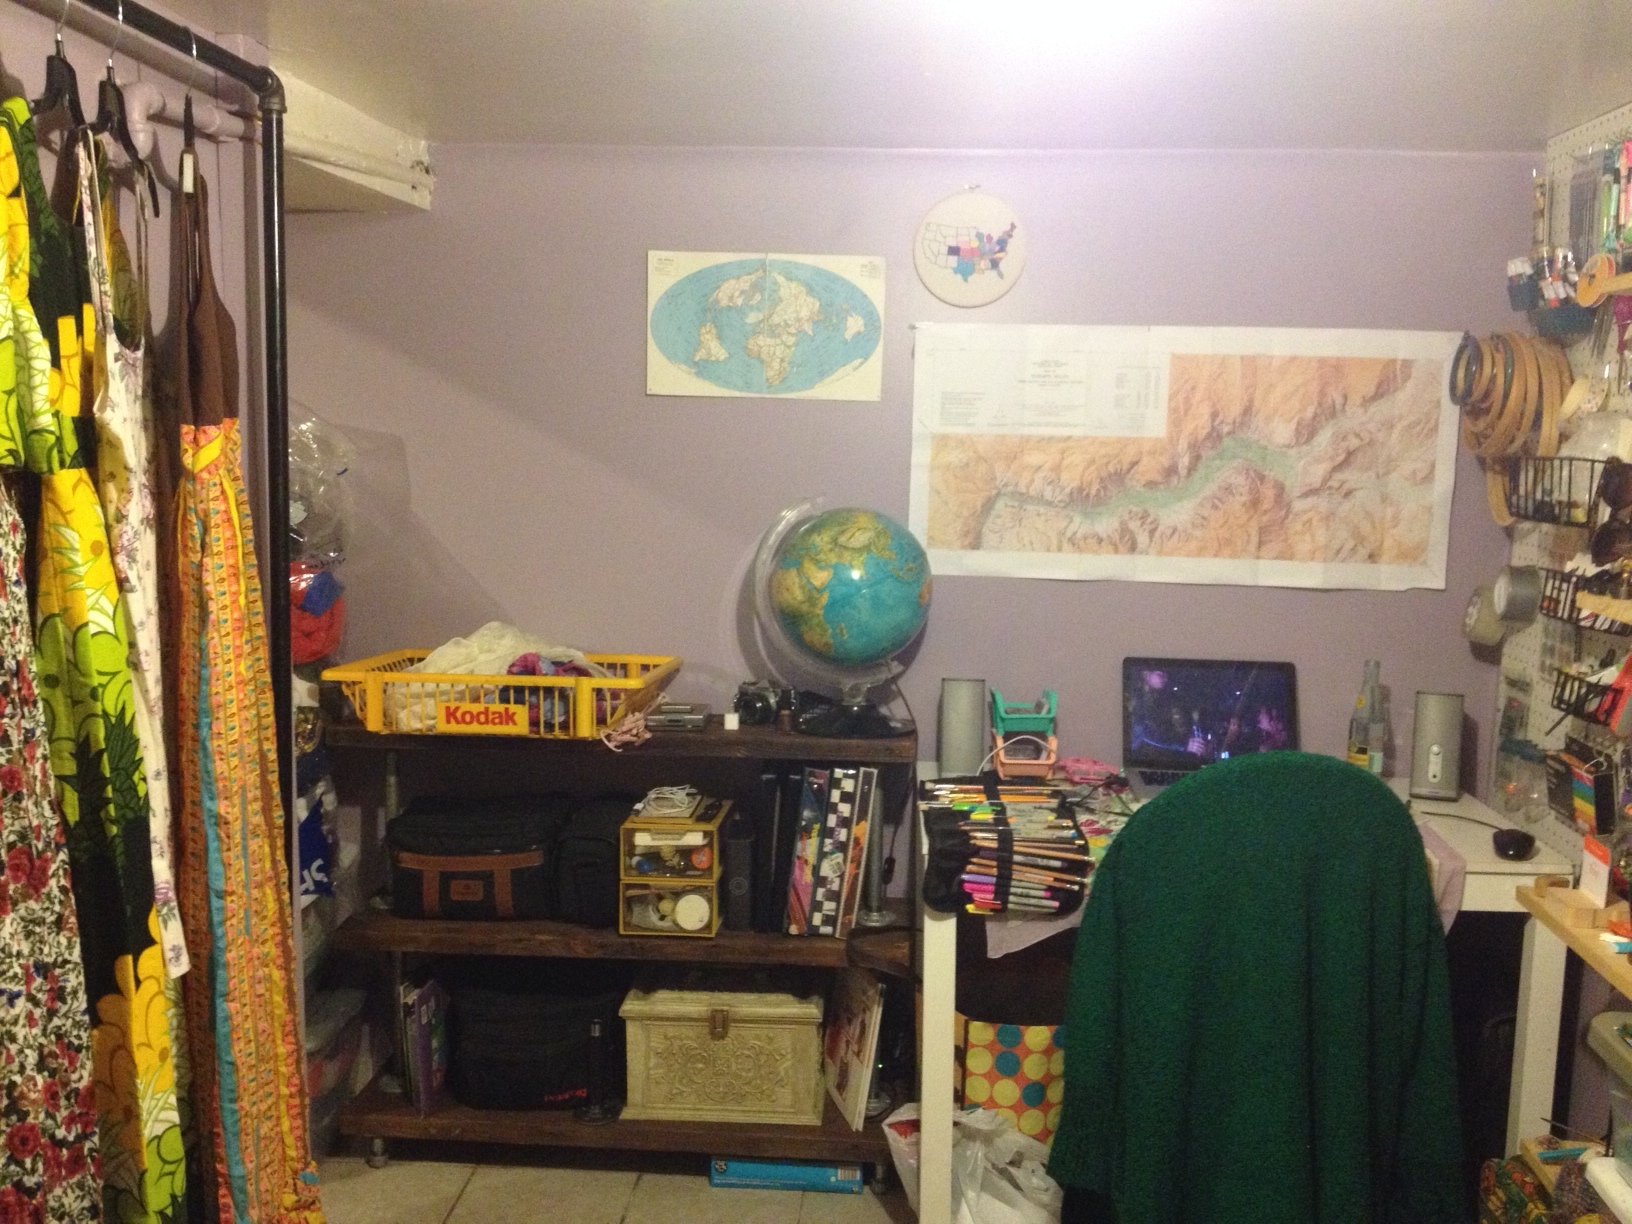  This is the small room of the basement apartment the shop was ran from in Humboldt Park, Chicago.&nbsp; 